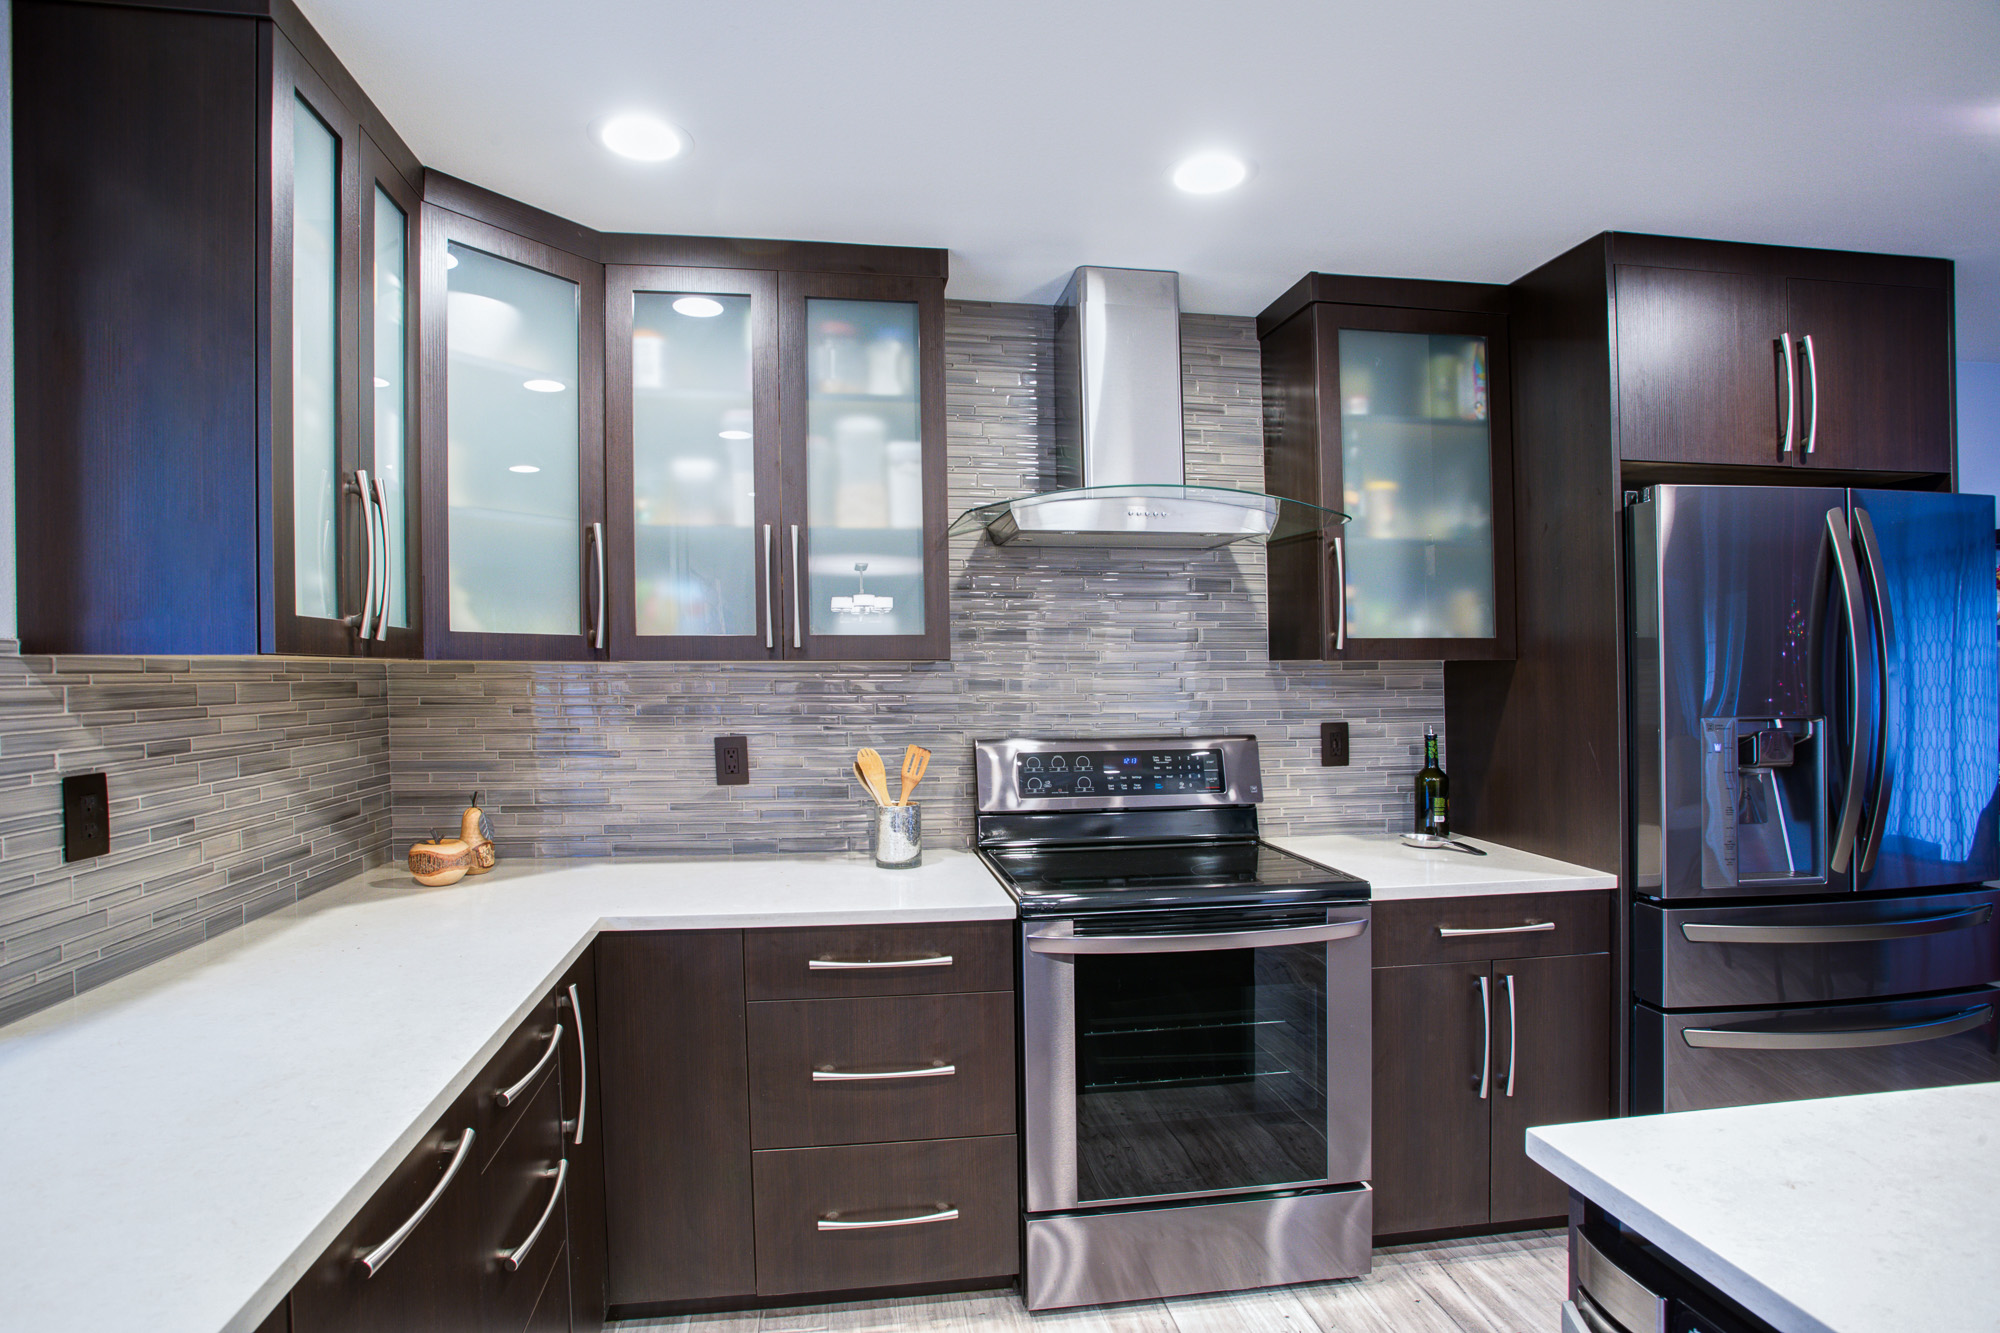 Revamp Kitchen Cabinets With Decorative Patterned Glass Rocklin